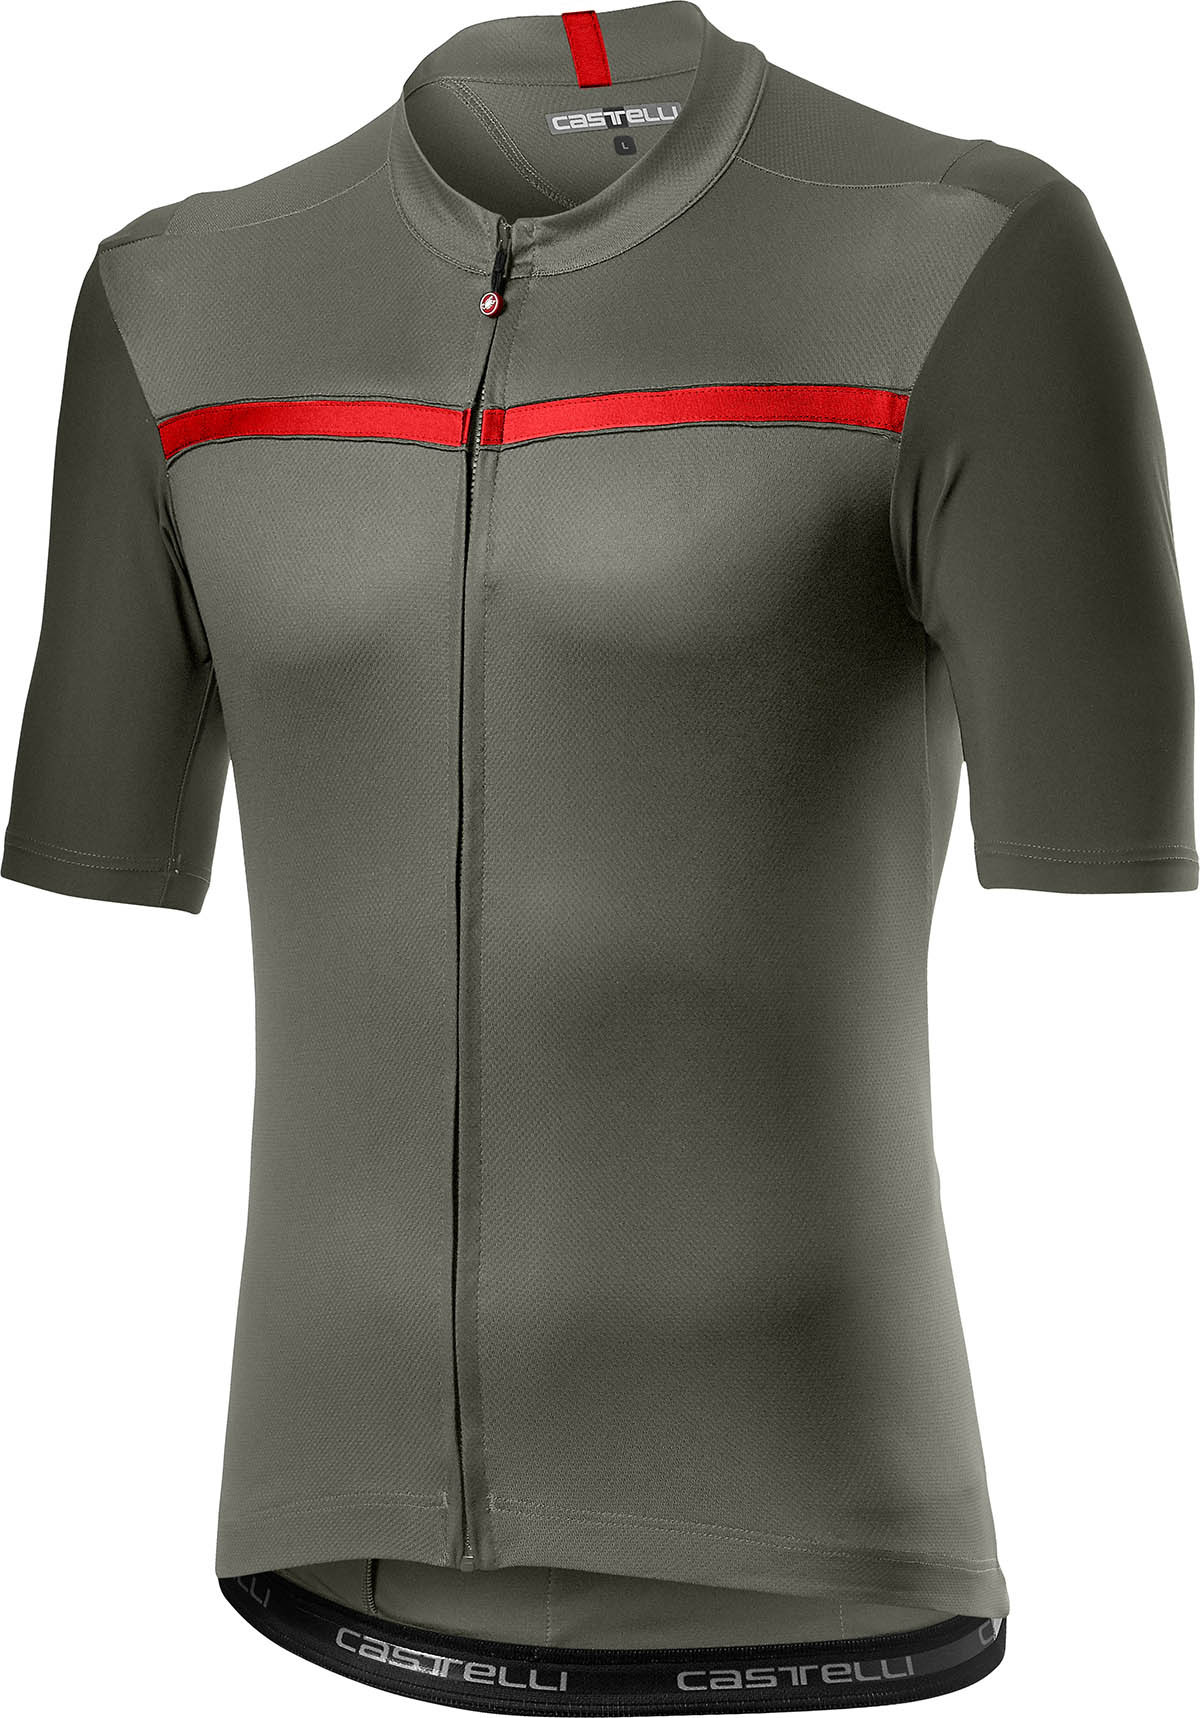 Castelli Unlimited Jersey - Forest Gray/Red